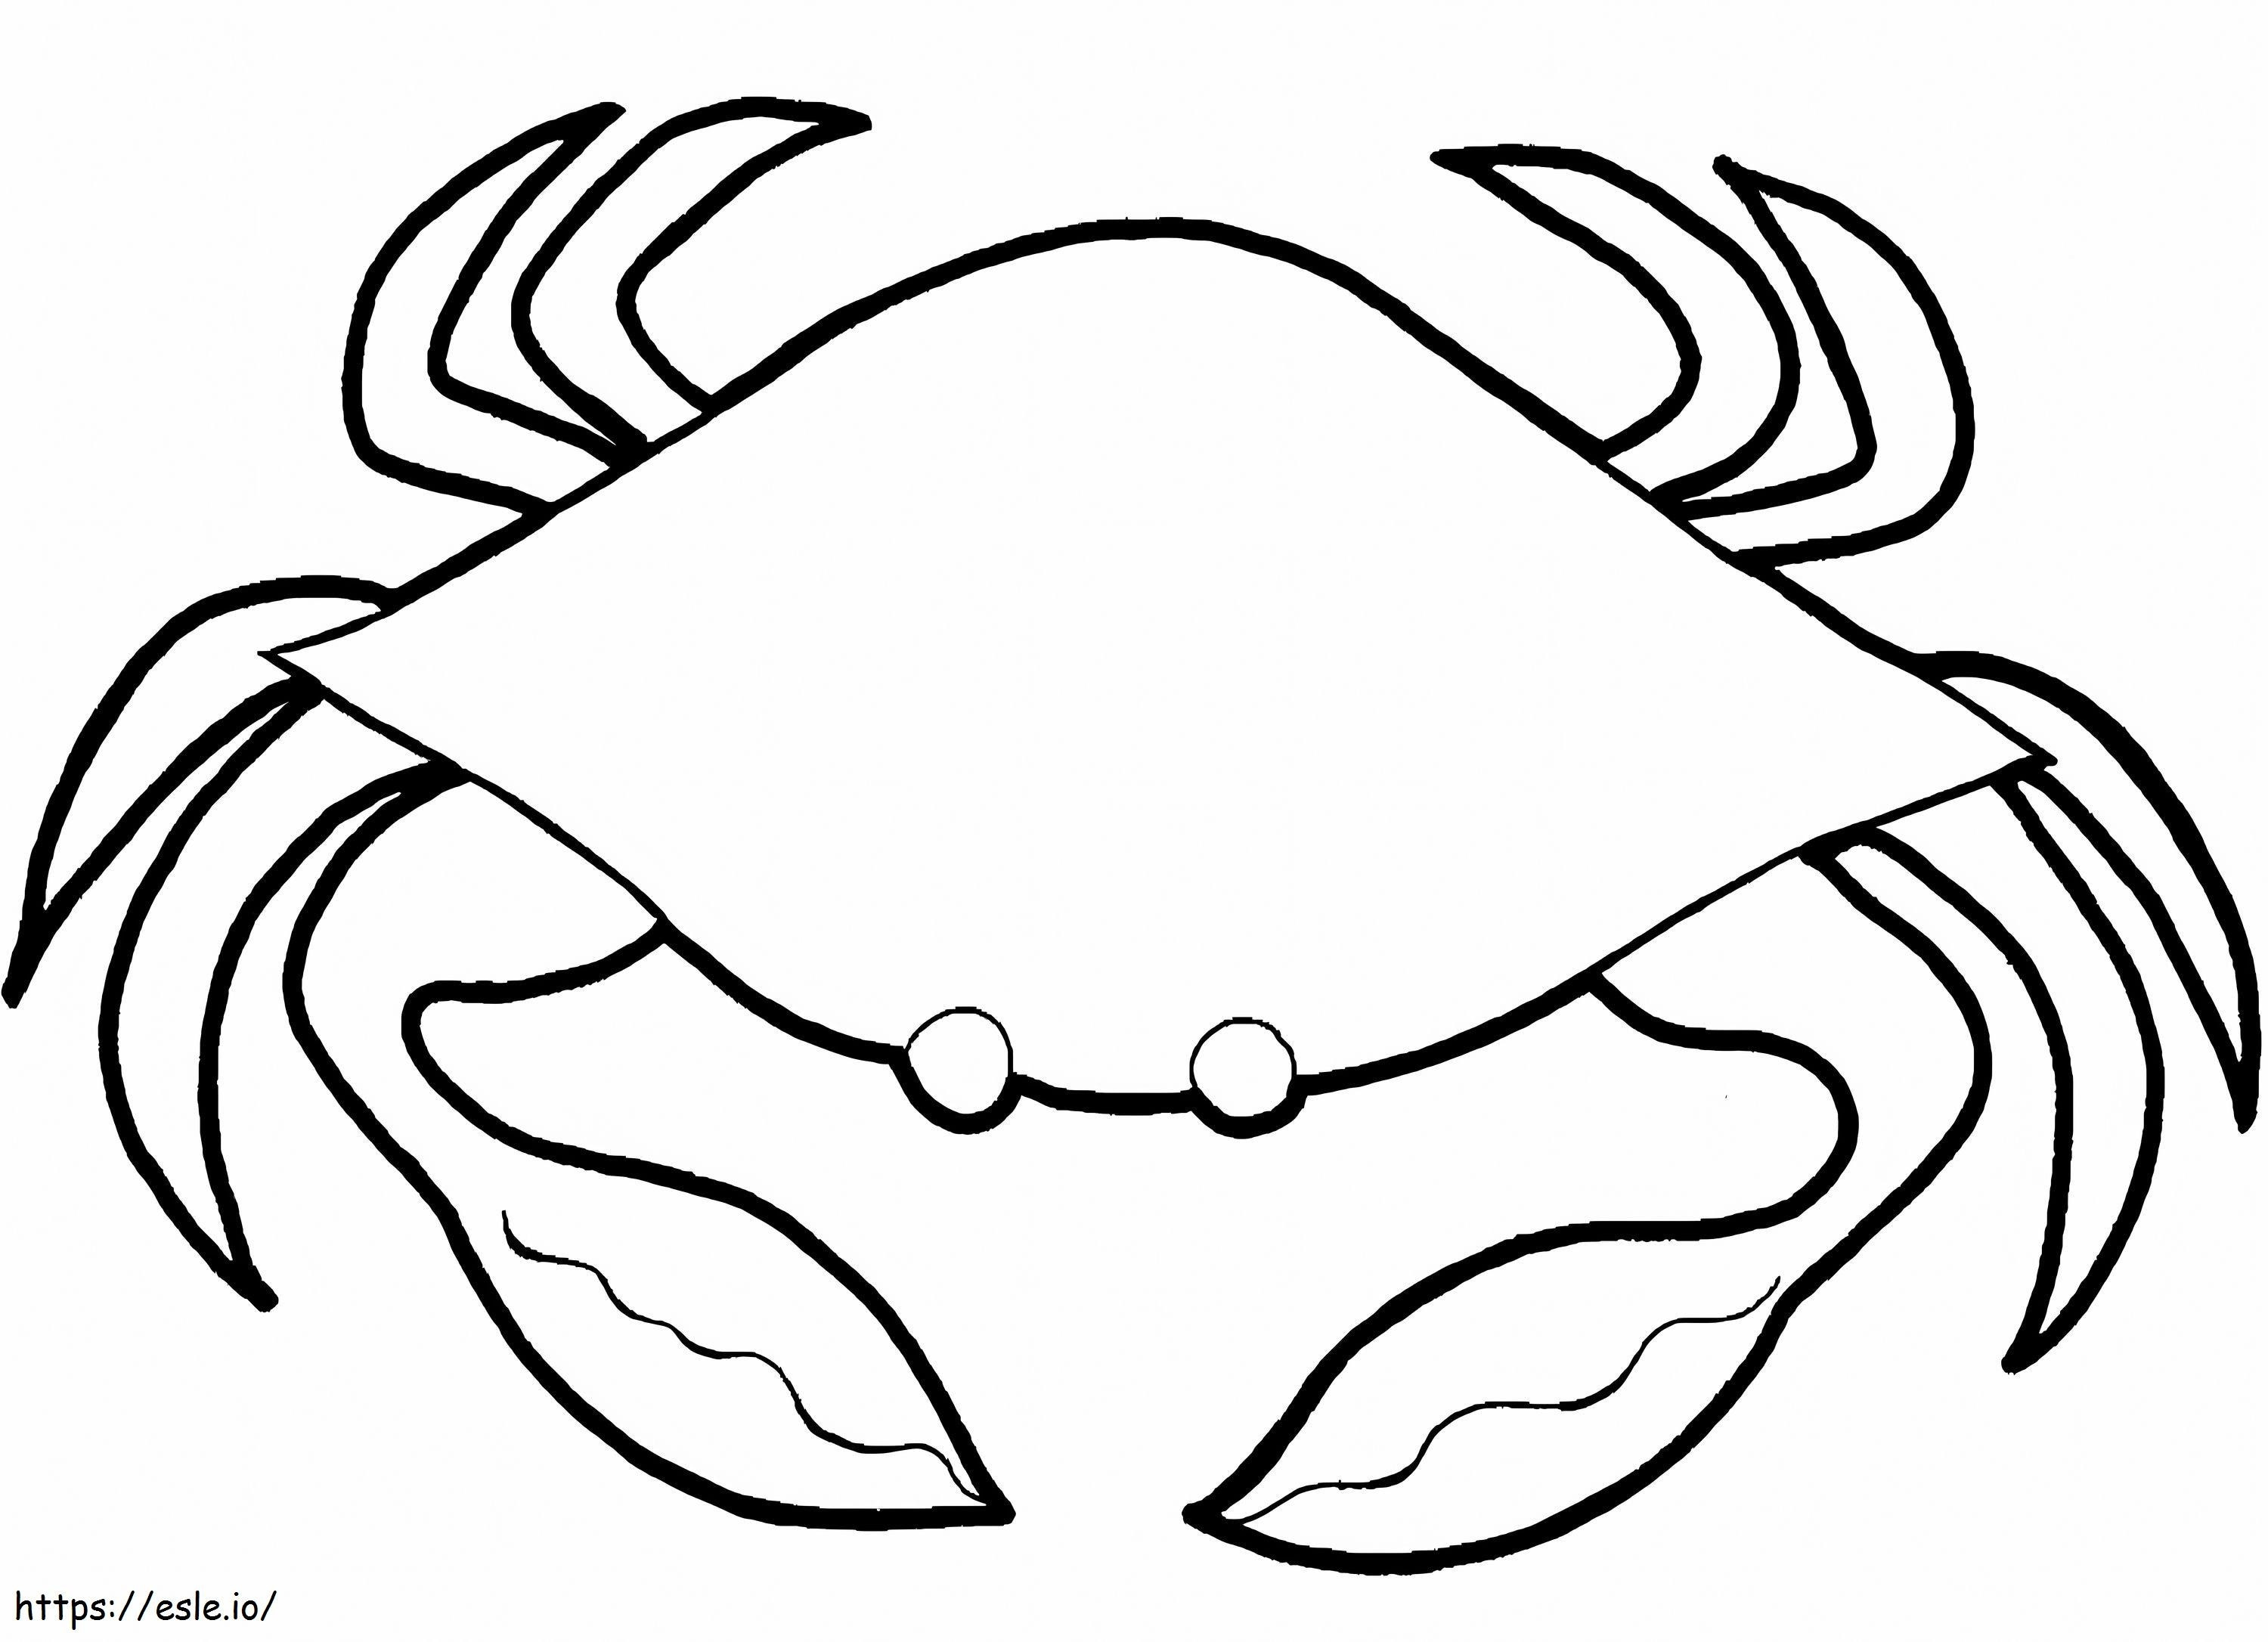 Crab 1 coloring page